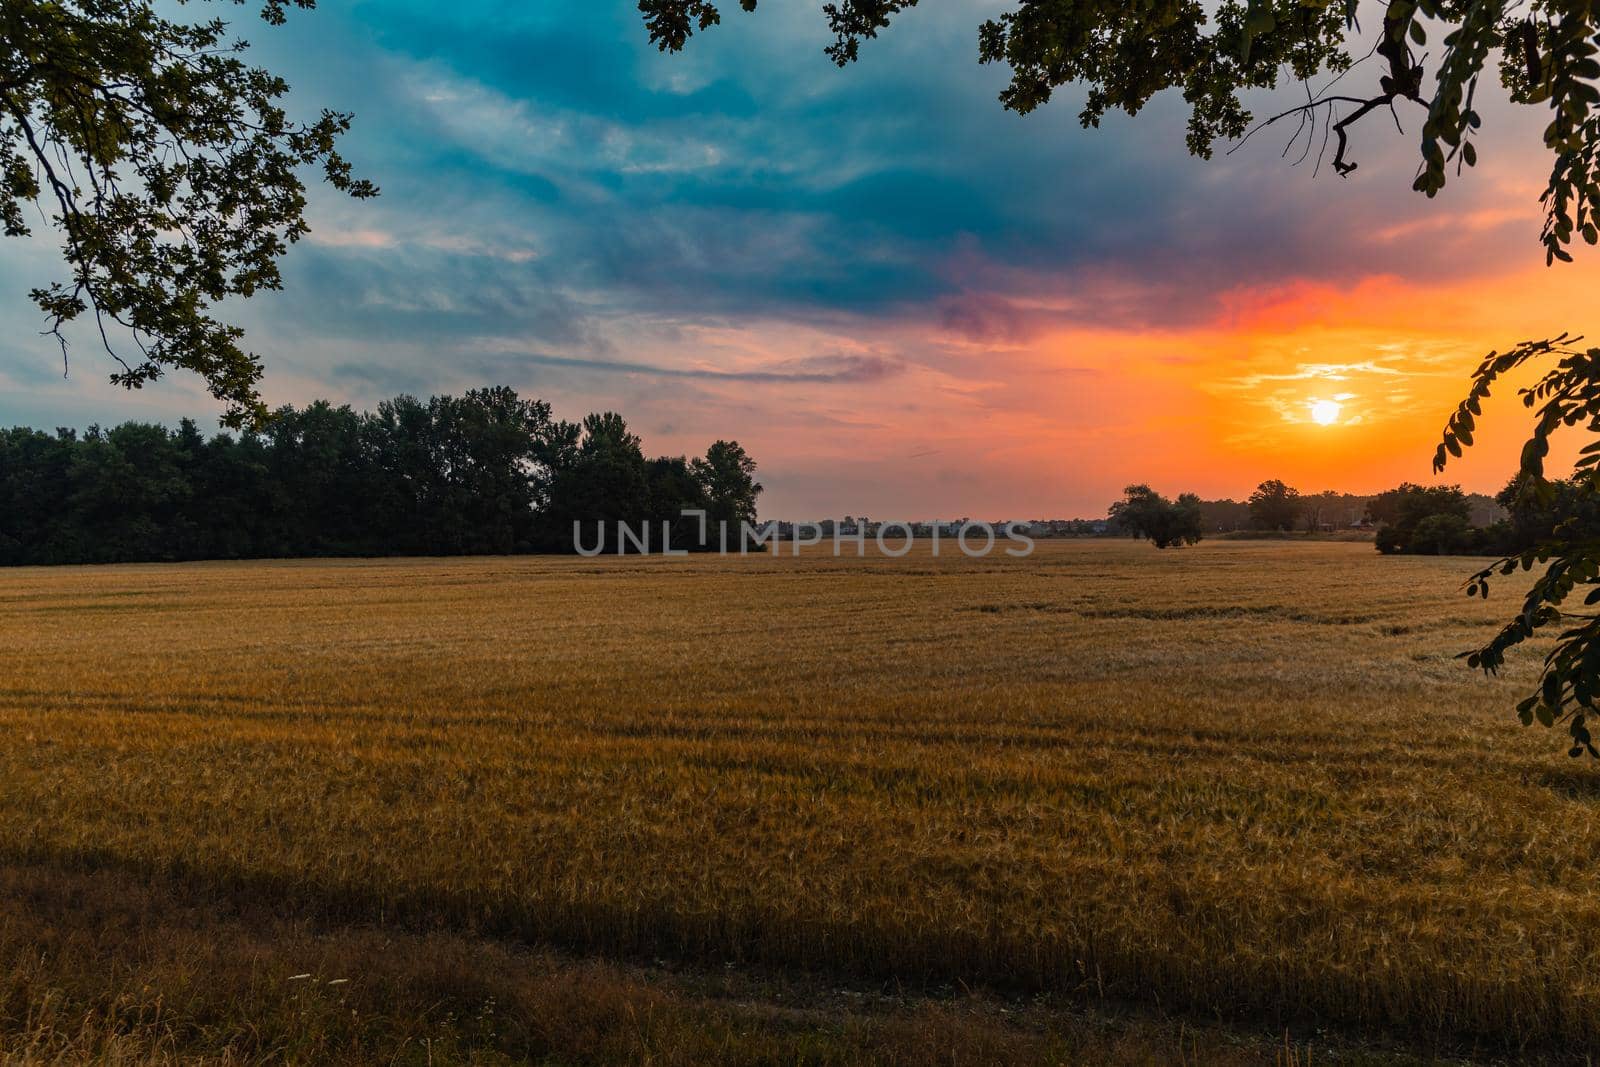 Beautiful cloudy sunrise over big yellow field and trees of forest